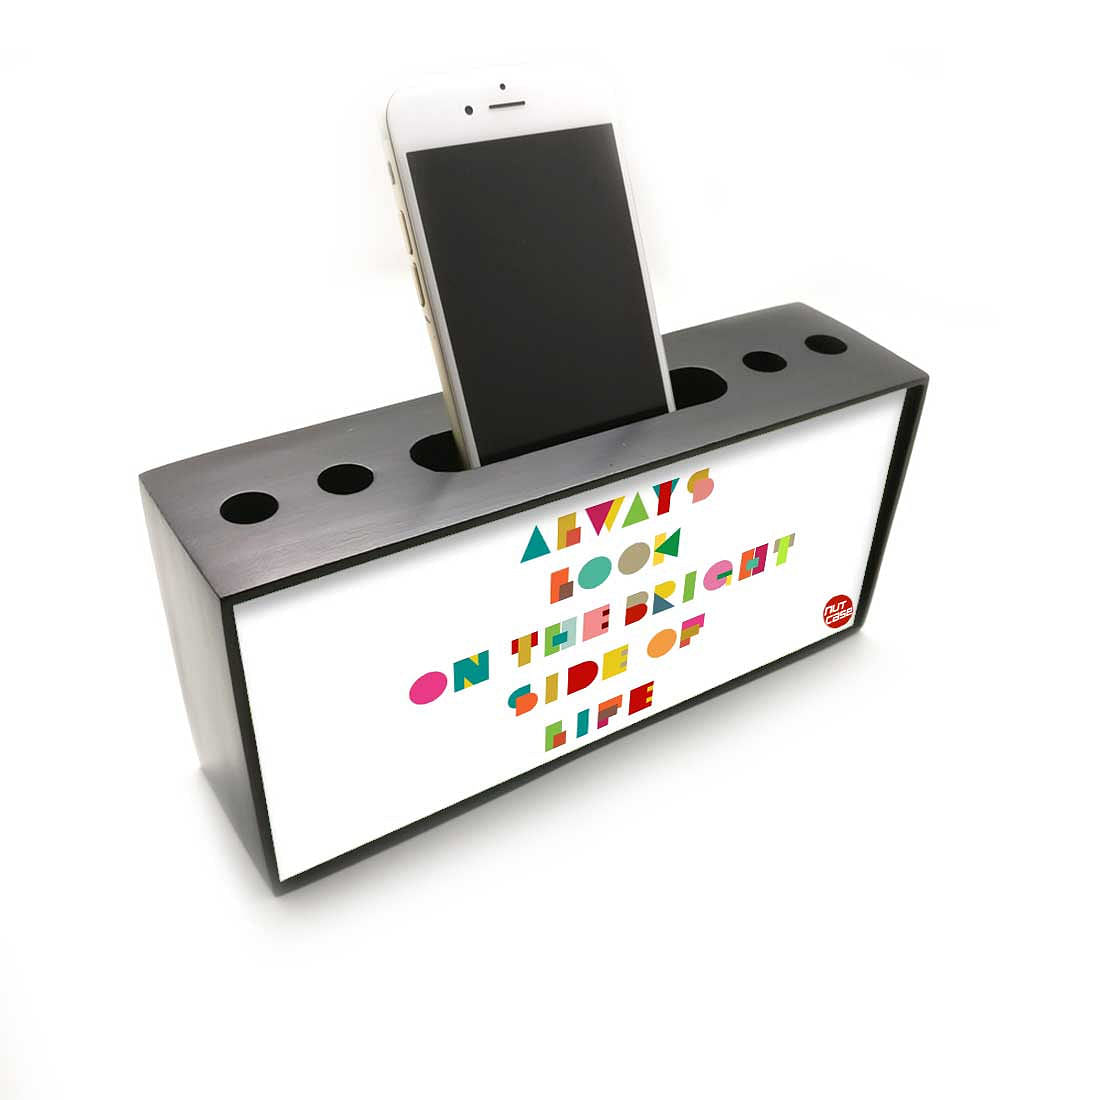 Phone Pen Stand Holder Desk Organizer for Office - Always Look On The Bright Nutcase